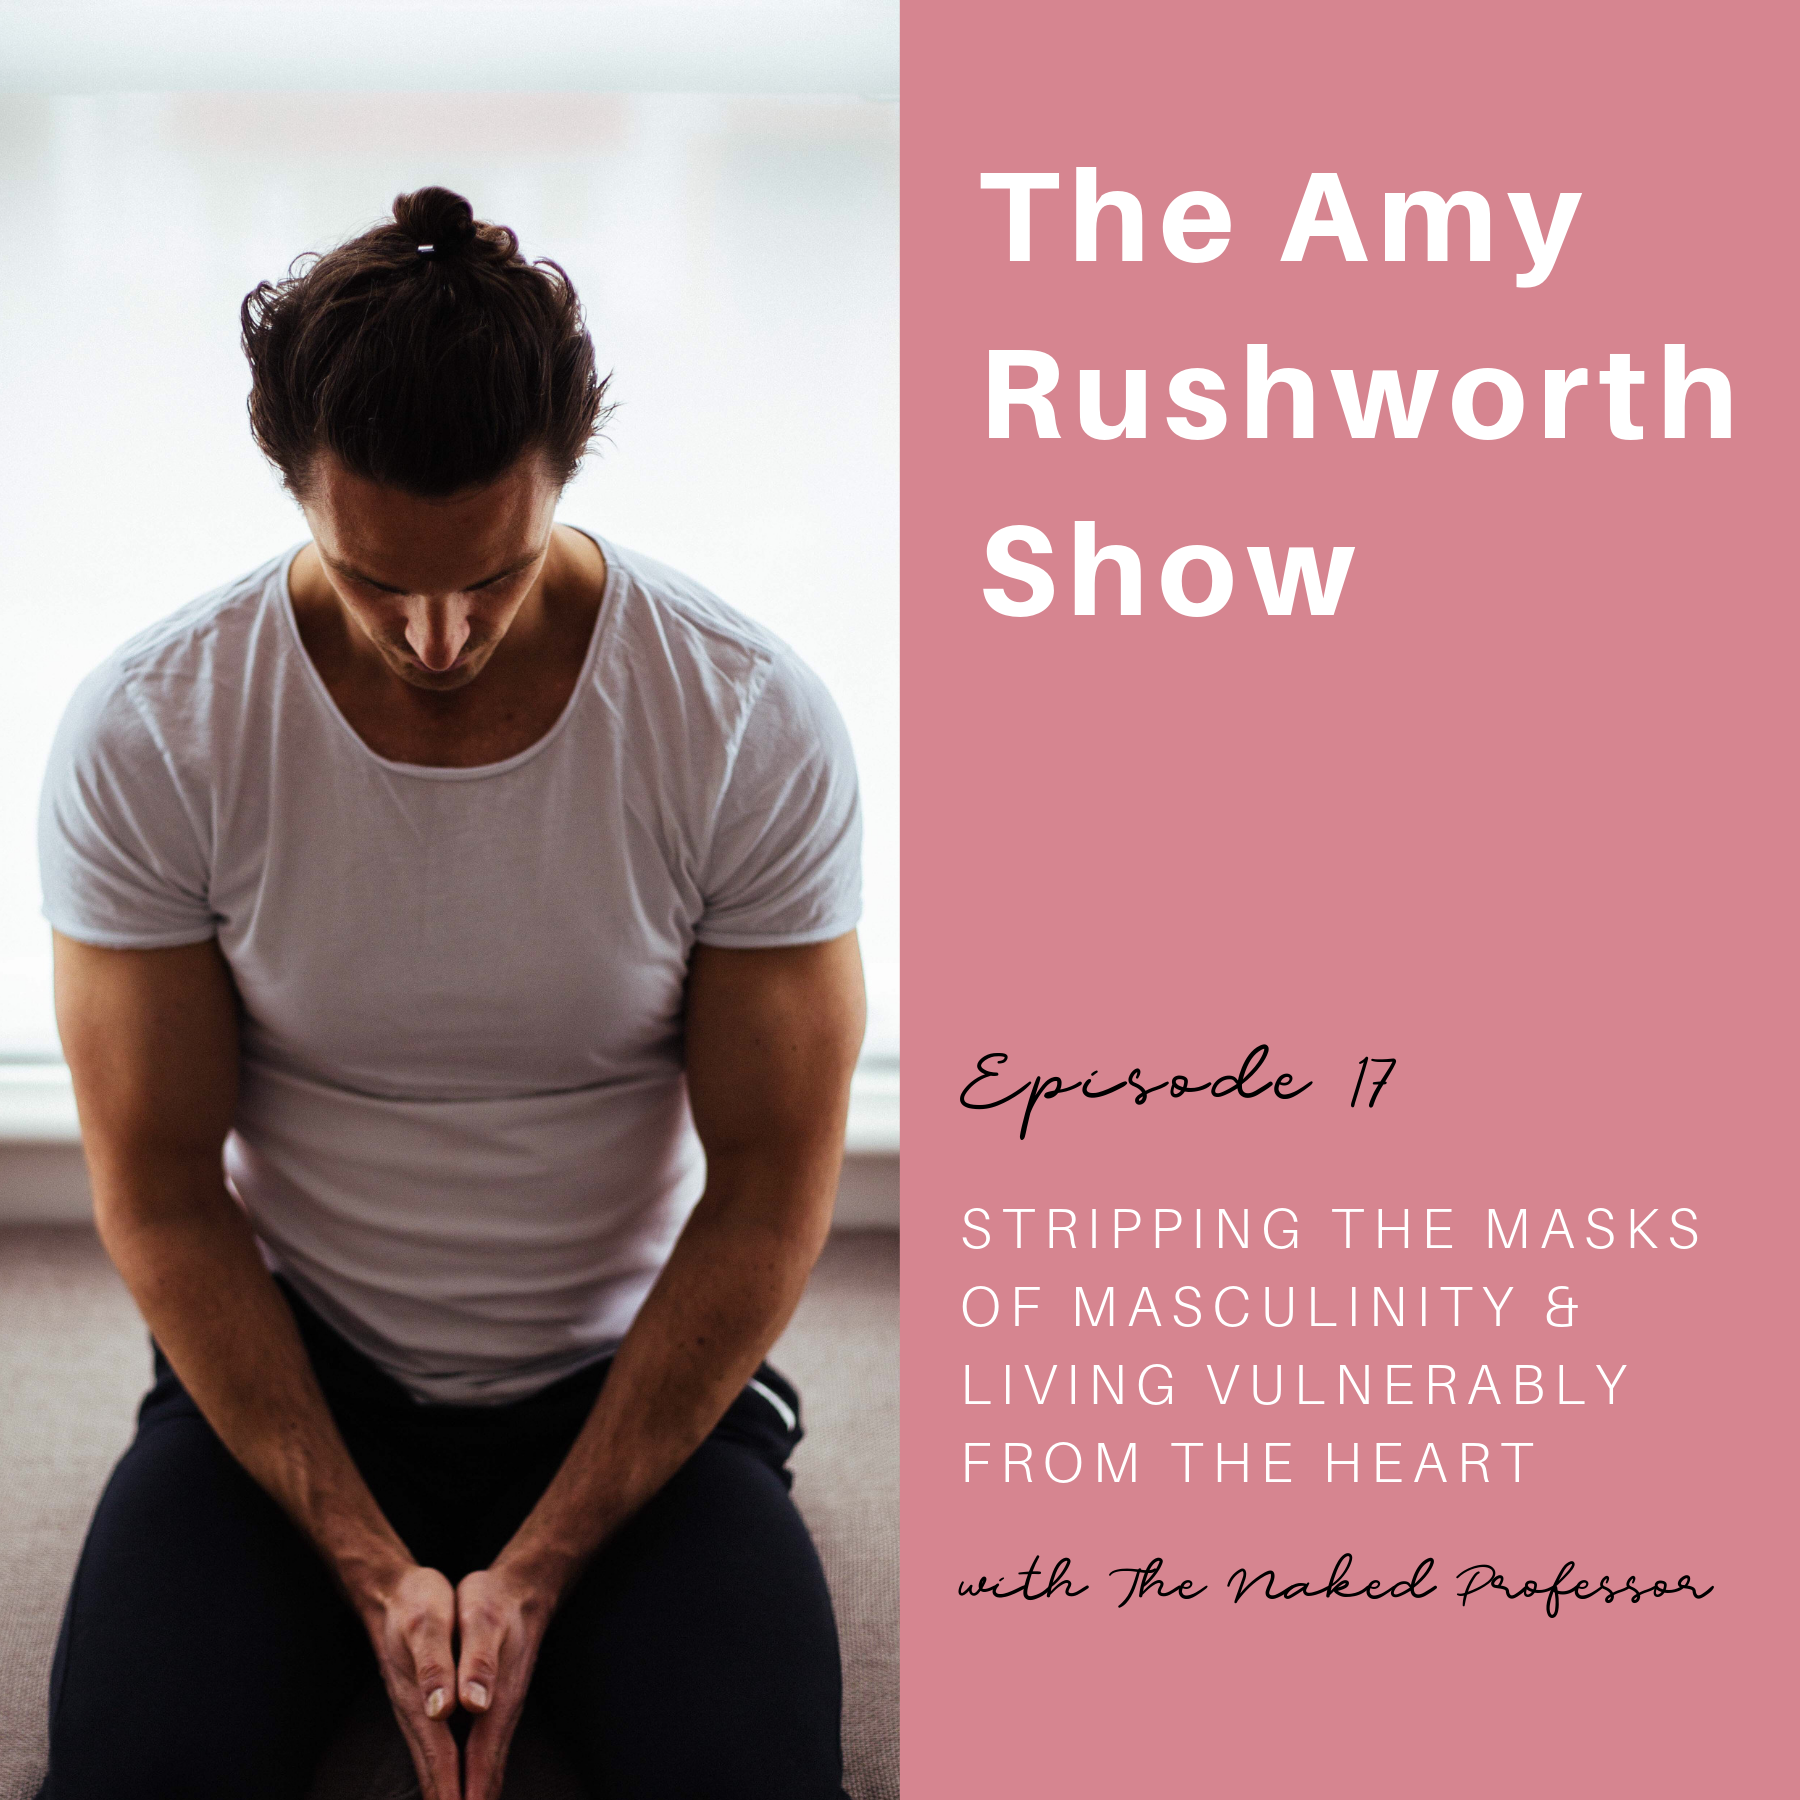 Episode 17: Stripping The Masks of Masculinity & Living Vulnerably From The Heart